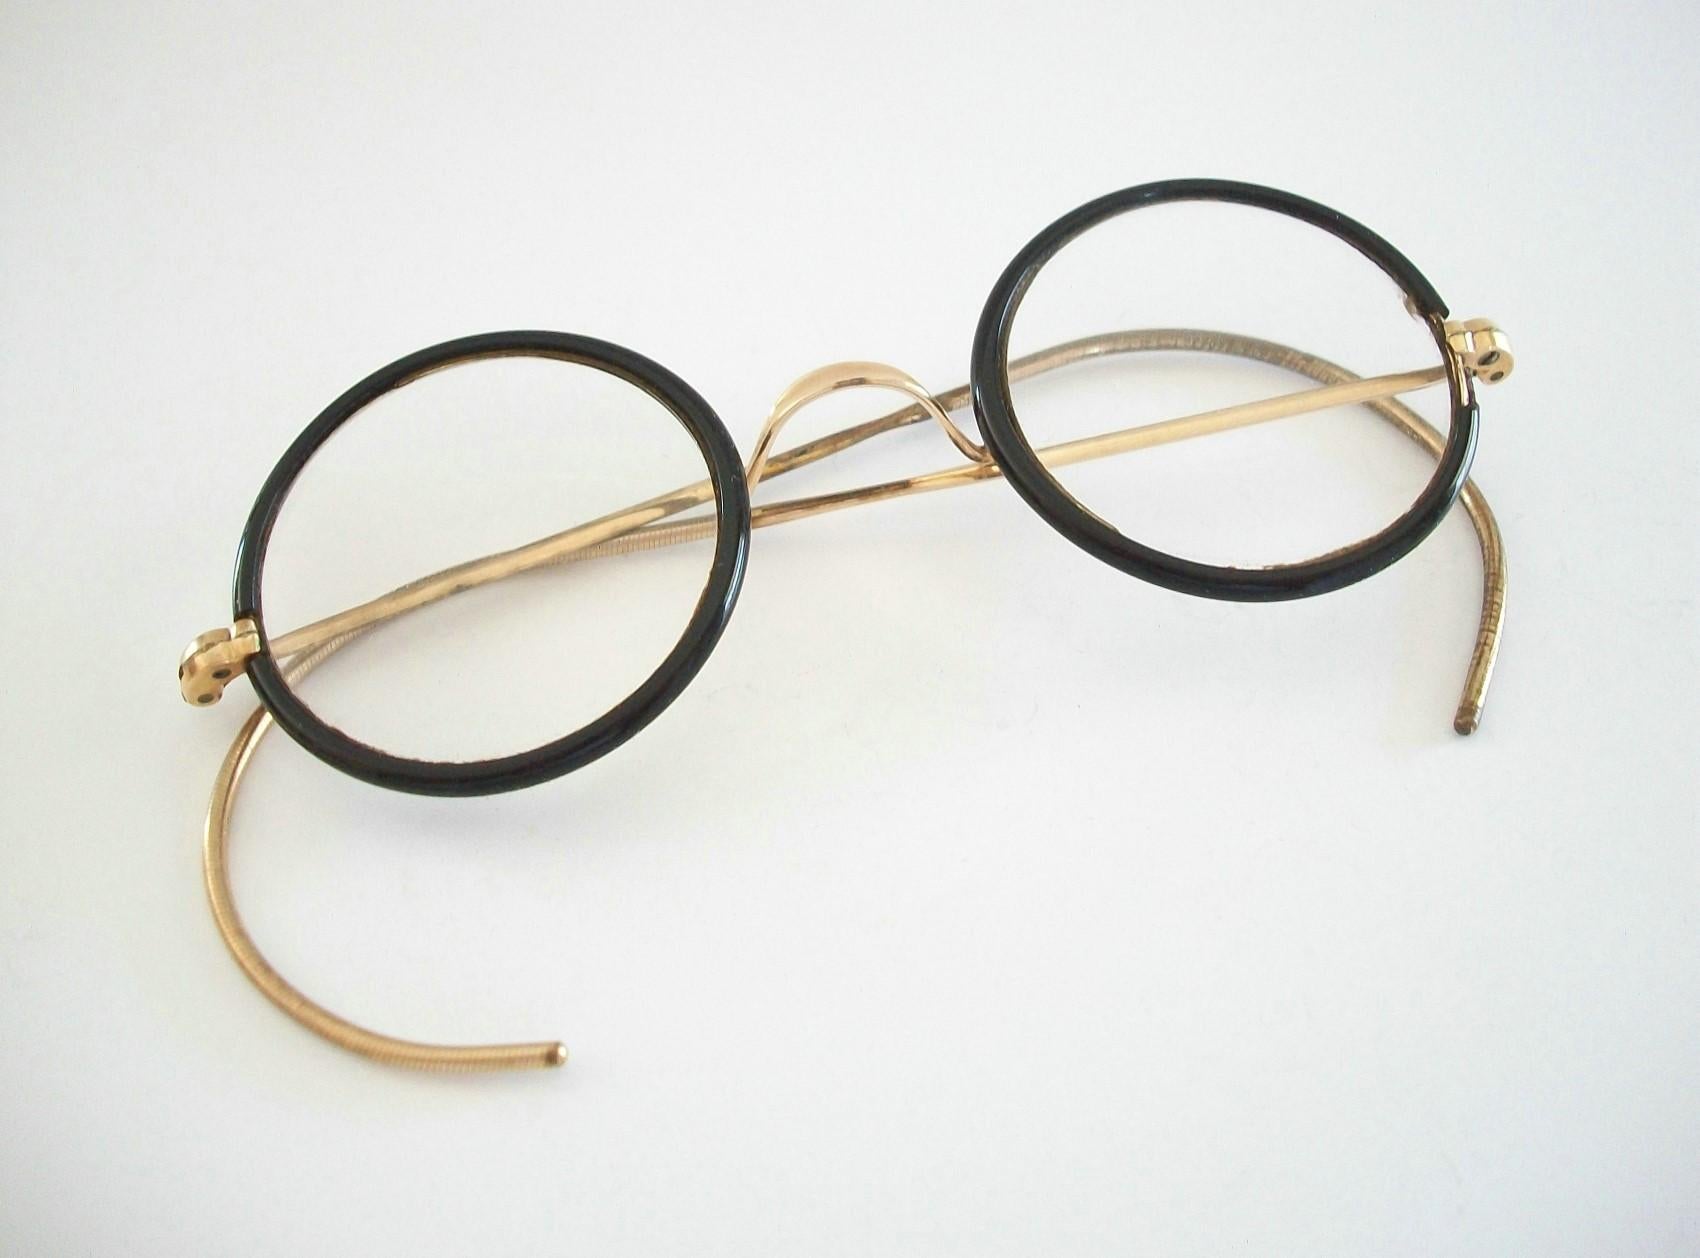 Bausch & Lomb - vintage black enamel round rim child's eyeglasses with gold tone nose piece and arms - featuring prescription lenses - fine quality frames - signed B&L (see photo) - Canada - circa 1940s.

Good vintage condition - loss to enamel